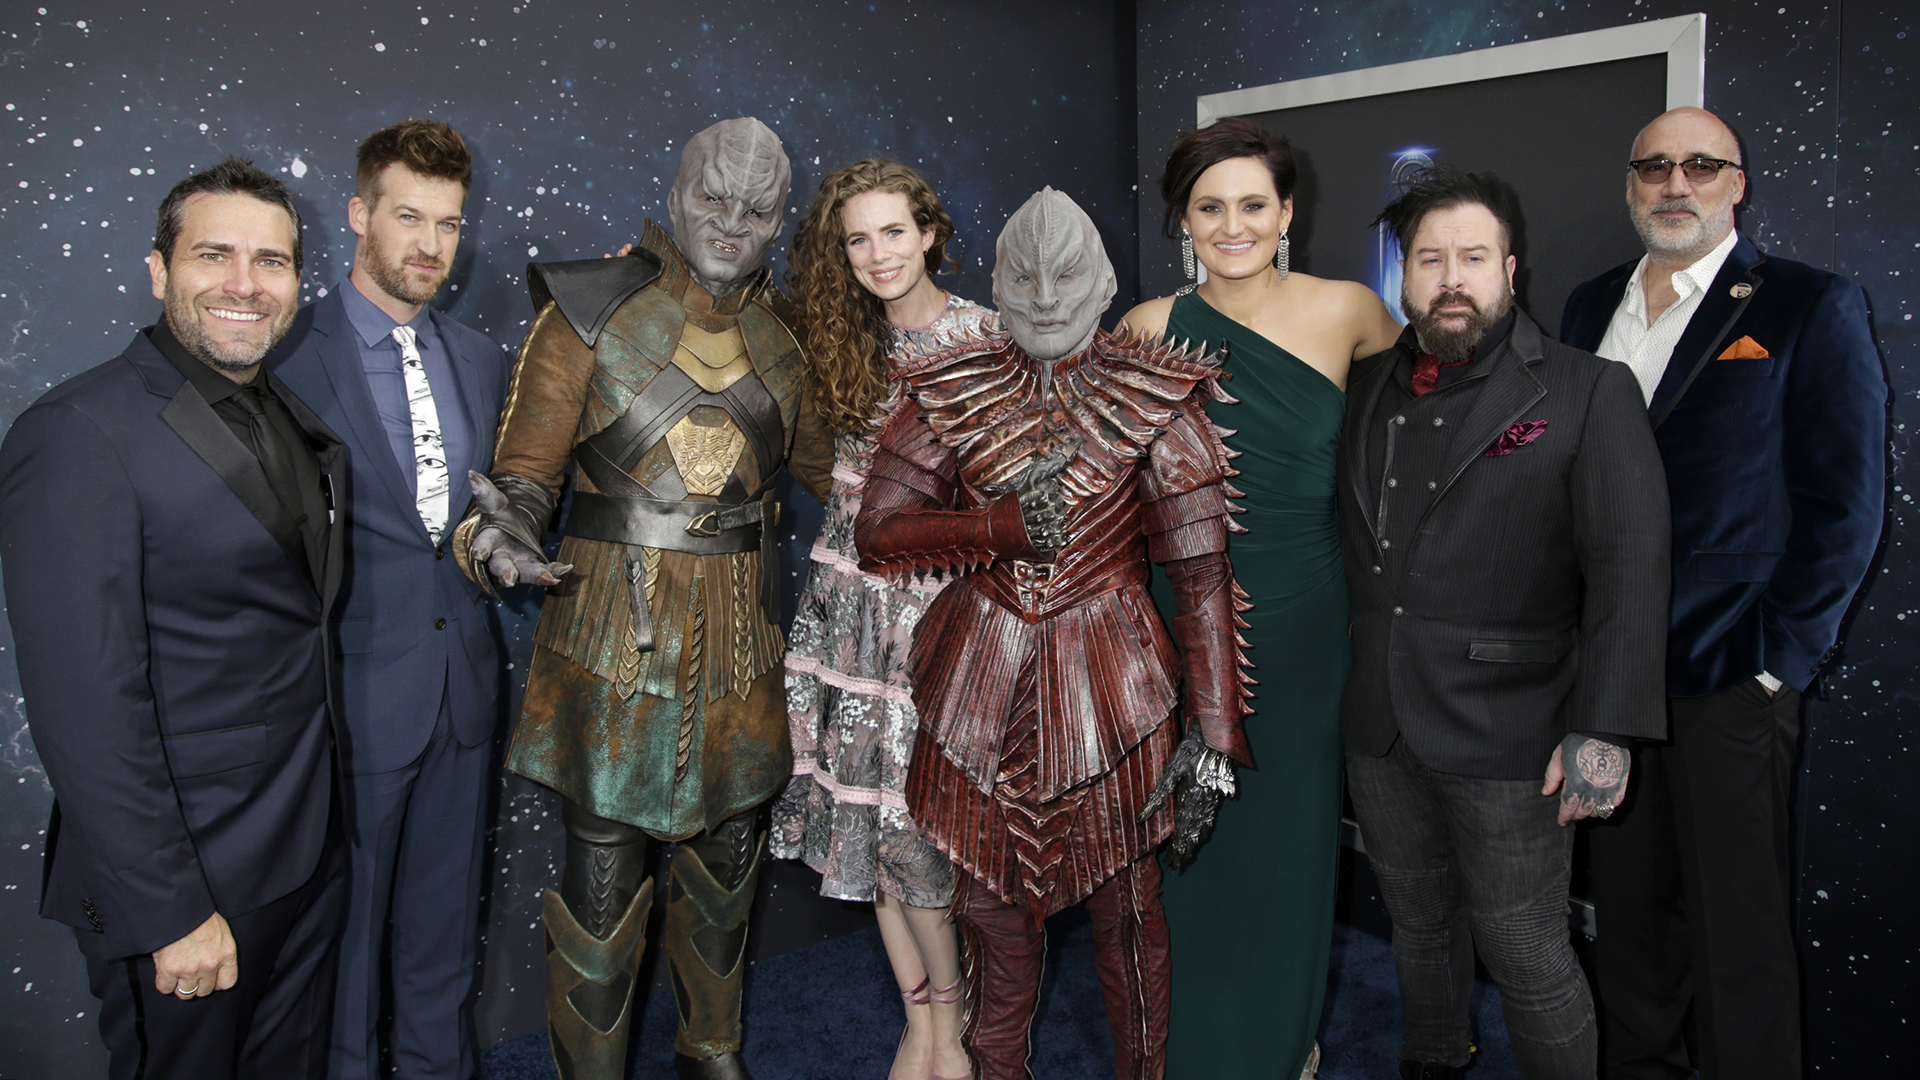 Cast and crew: James MacKinnon, Kenneth Mitchell, Clare McConnell, Mary Chieffo, Glenn Hetrick, and Neville Page (with Klingons!) from Star Trek: Discovery